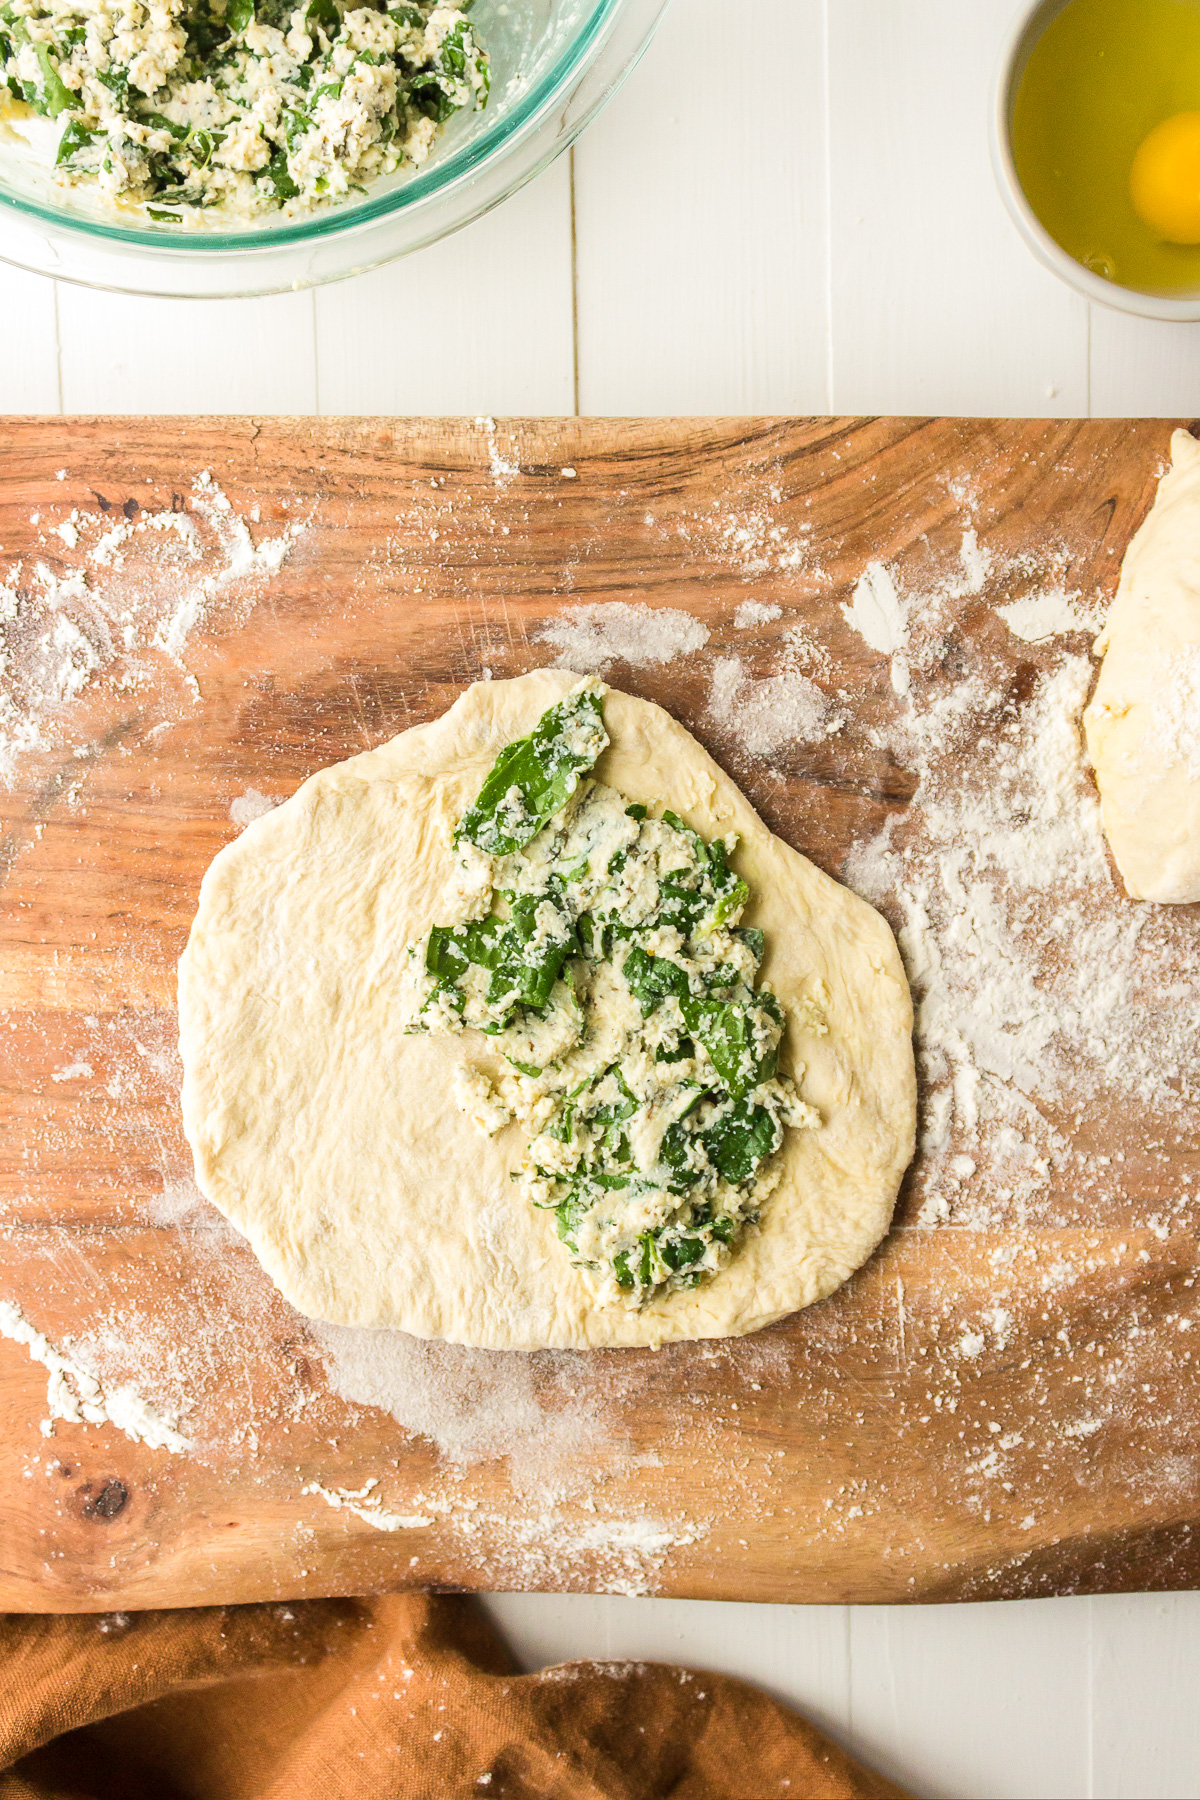 Spinach and ricotta mixture on half of a piece of pizza dough on a wooden cutting board.